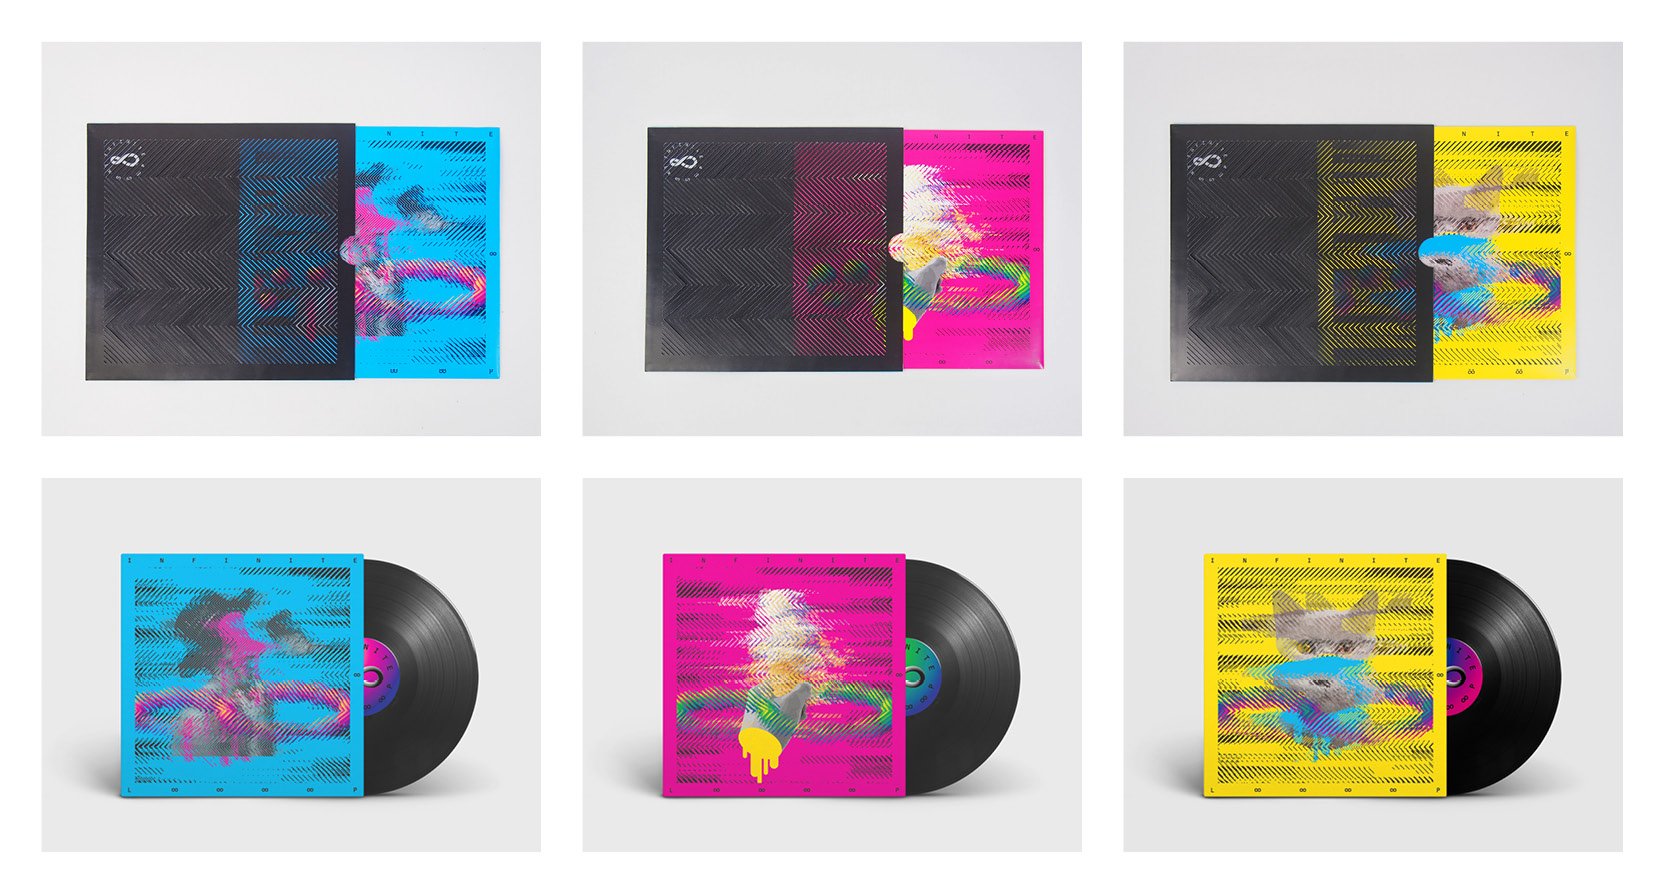 A set of three vinyl disc cover cases, one blue with magenta drawings, one magenta with green and yellow drawings and one yellow with blue drawings on them.